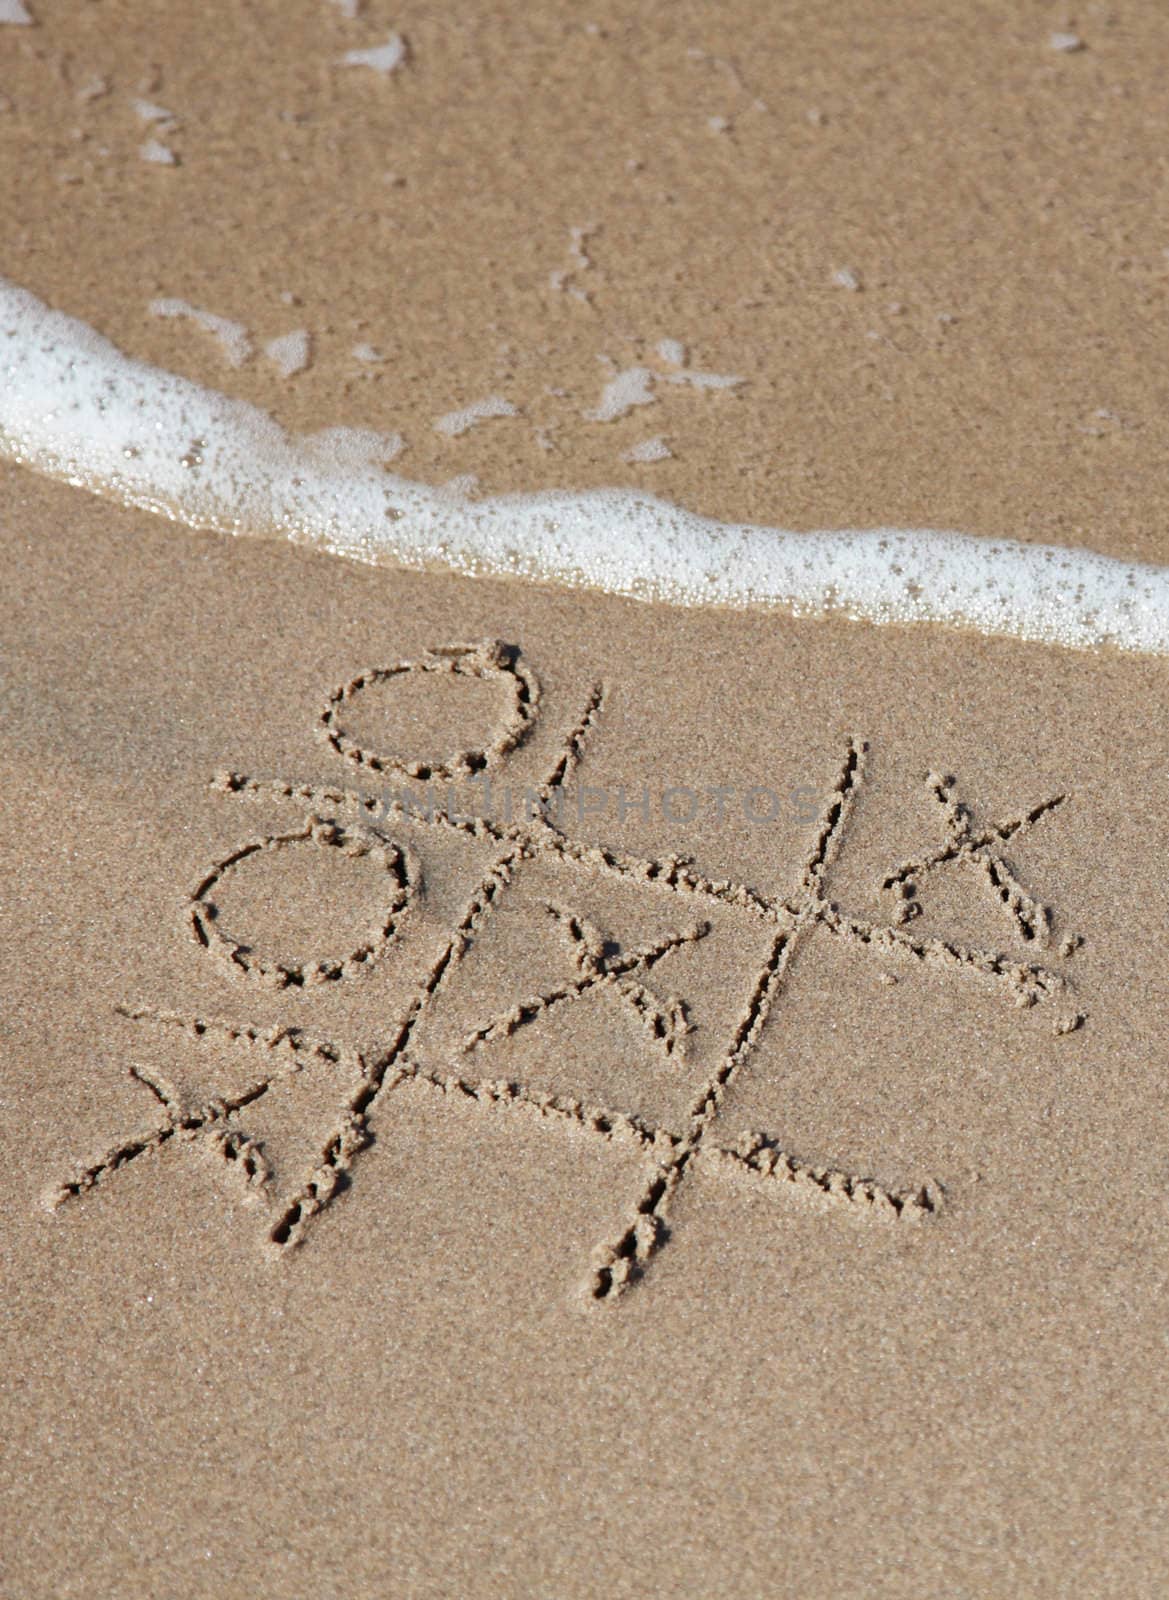 A tic tac toe game drawn in the sand on the beach.